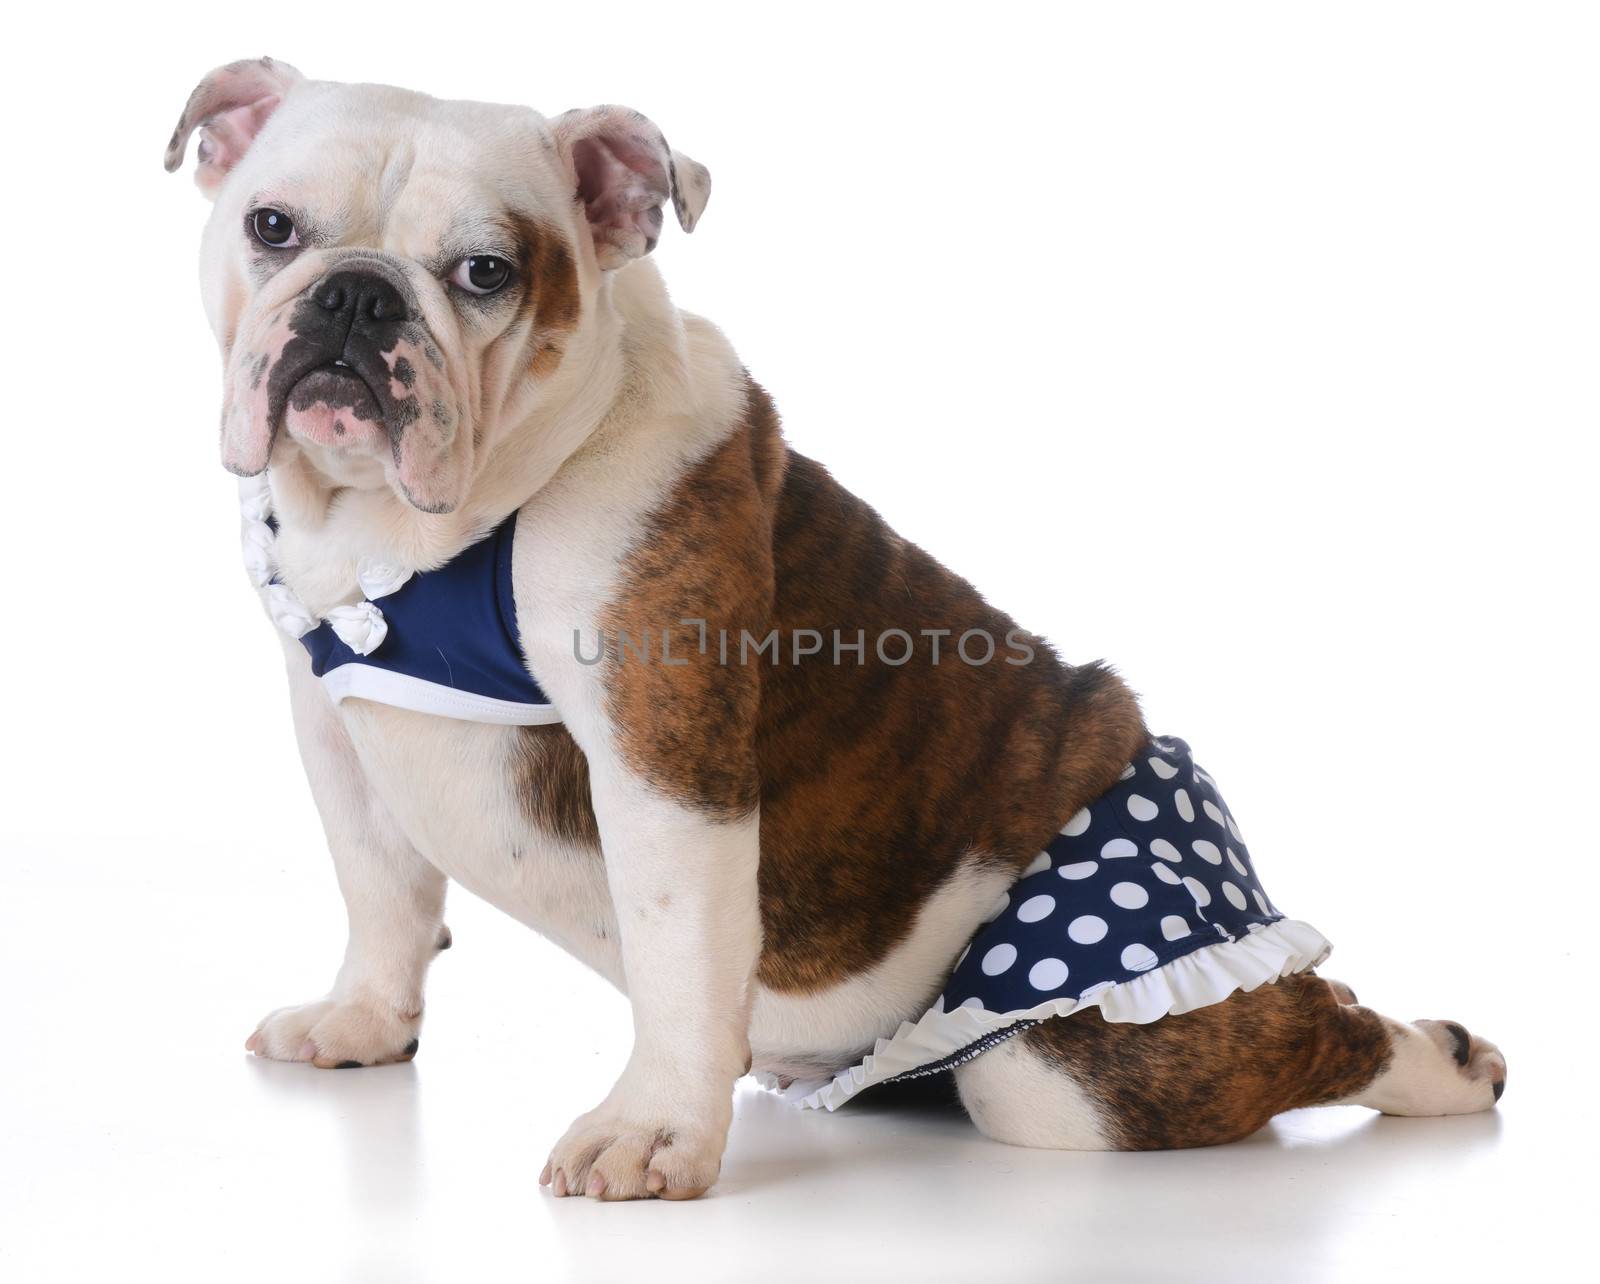 dog wearing bathing suit by willeecole123